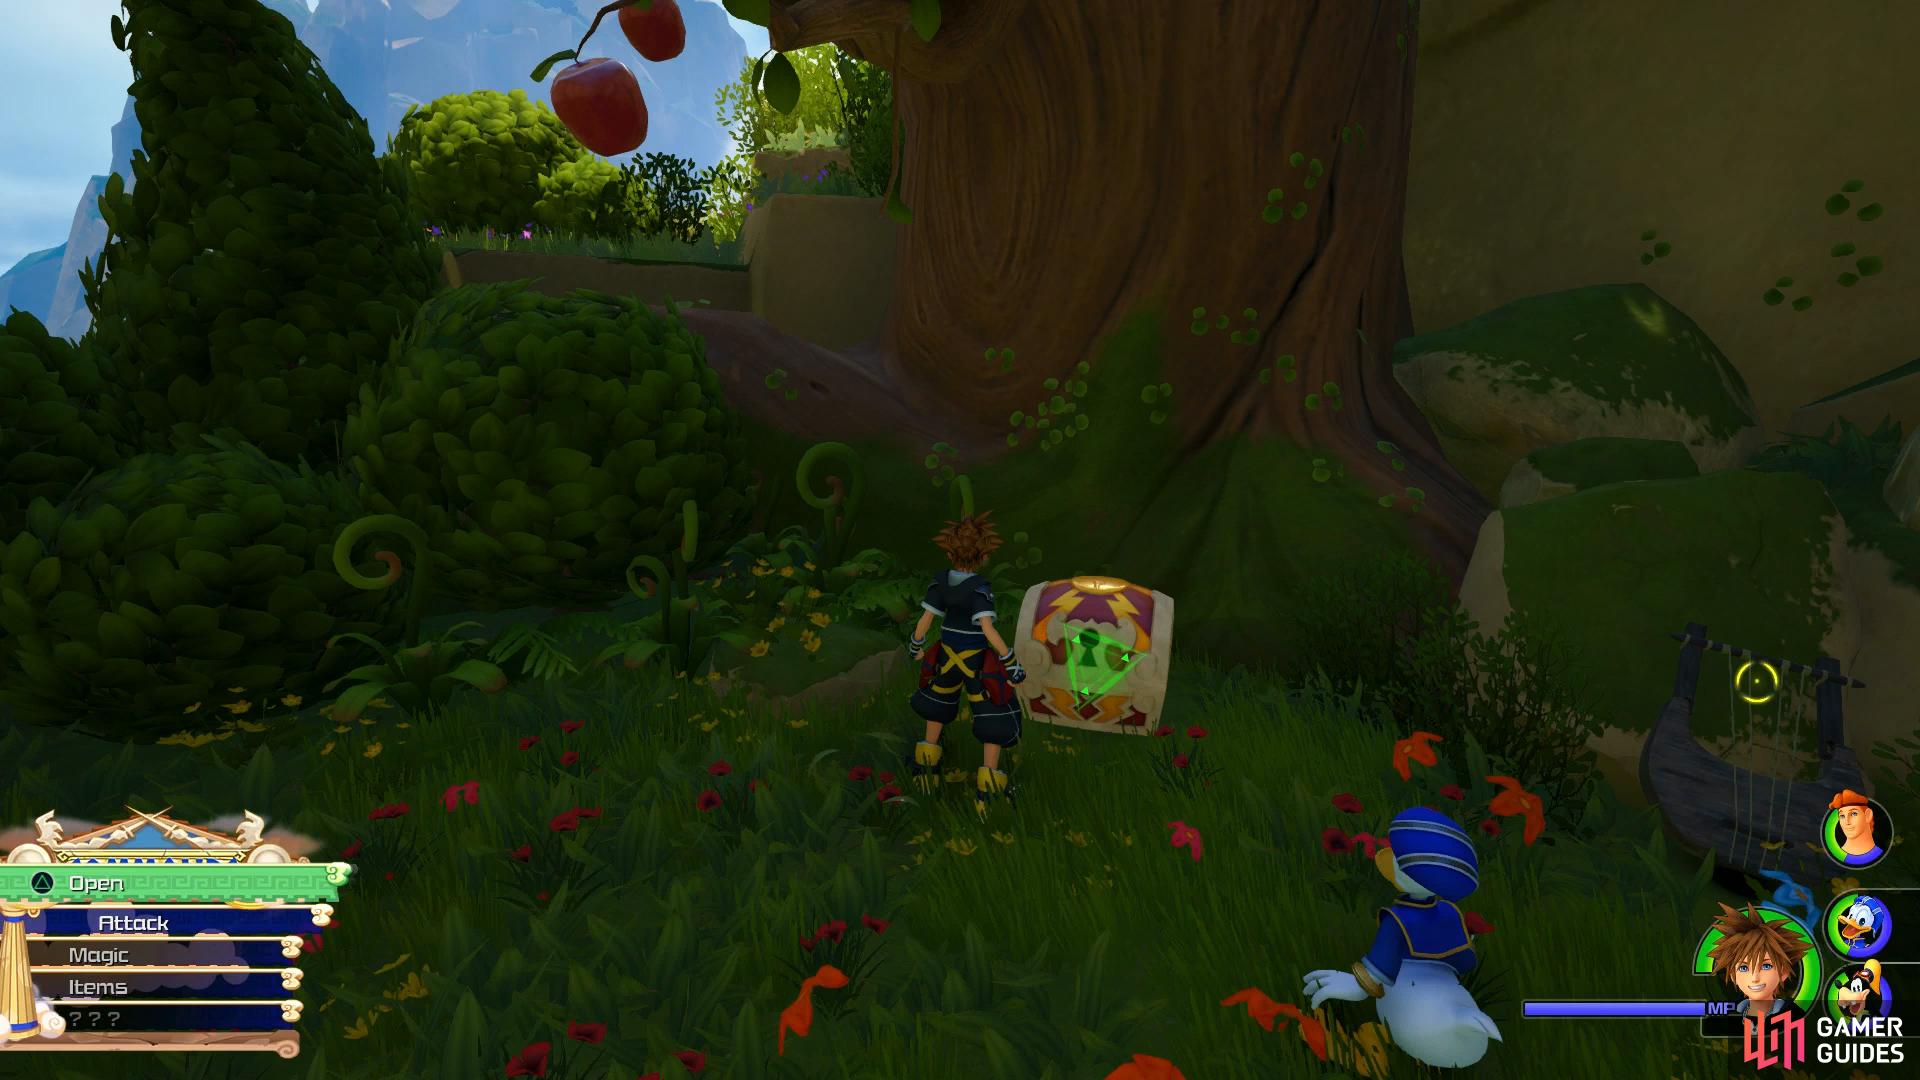 Look under the apple tree for this chest.